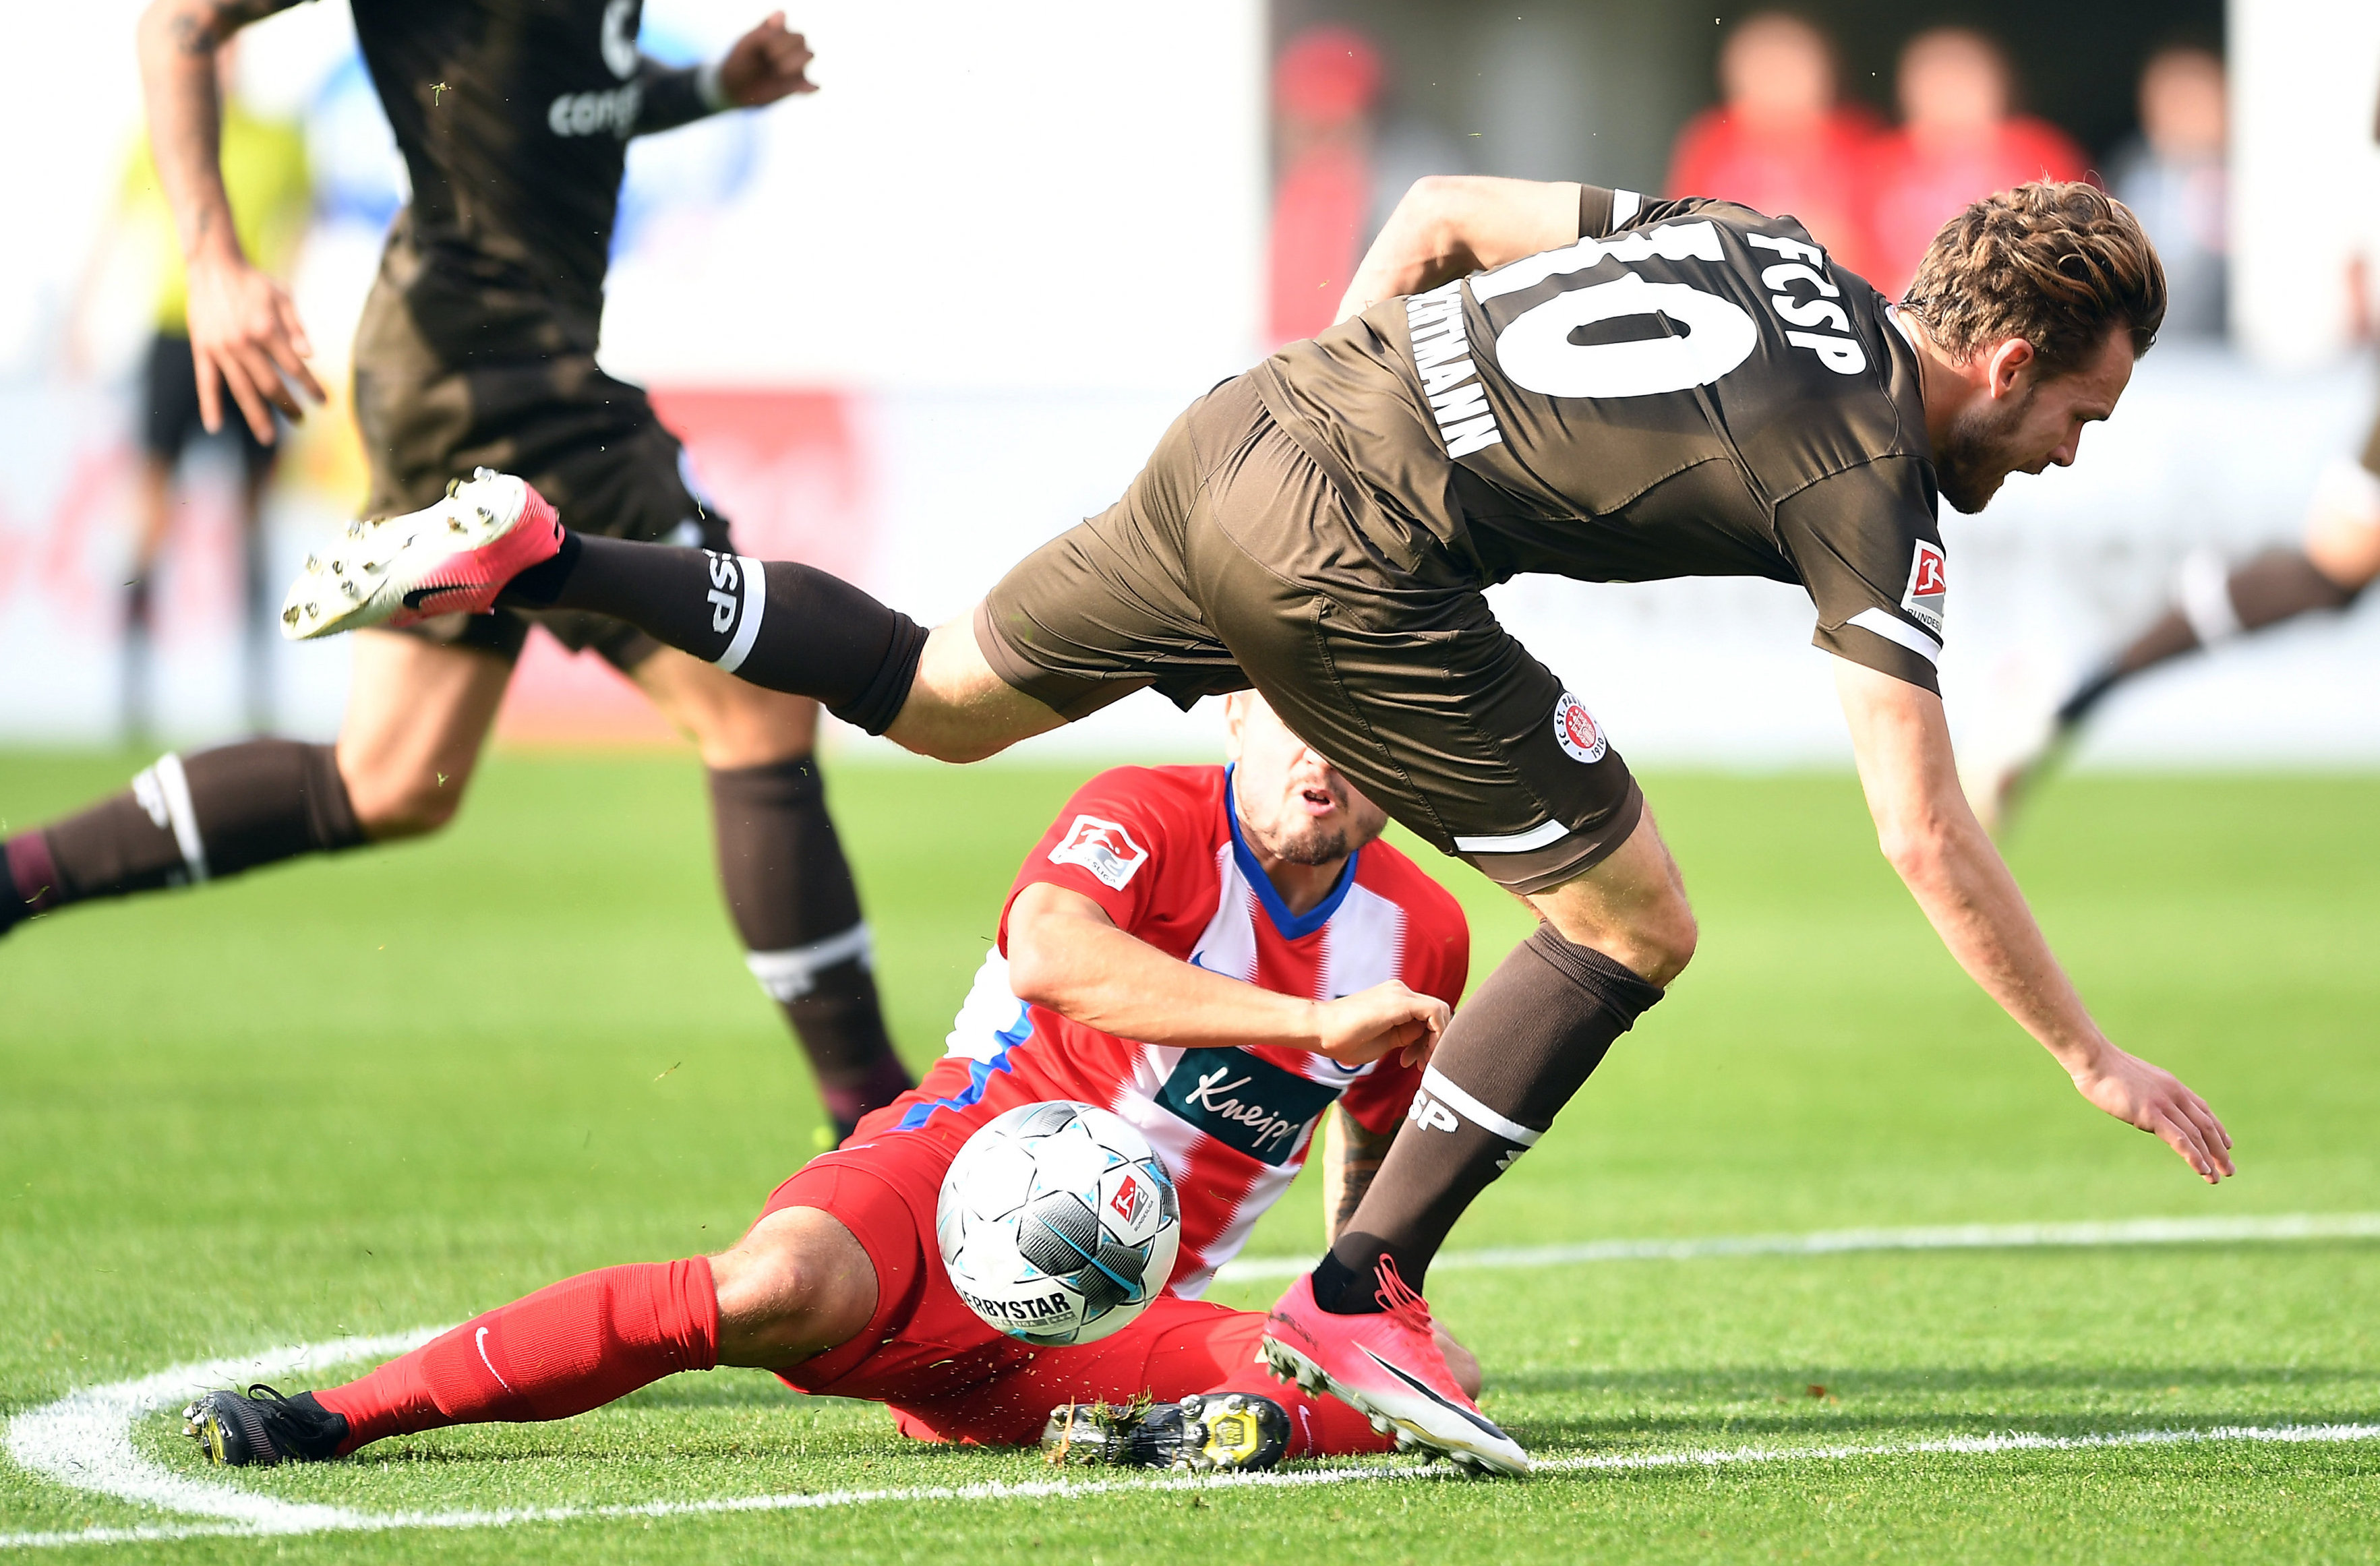 Christopher Buchtmann was forced to go off in the 33rd minute after picking up an injury in a block tackle by Heidenheim's Marnon Busch. Hope to see you back soon, Buchti!